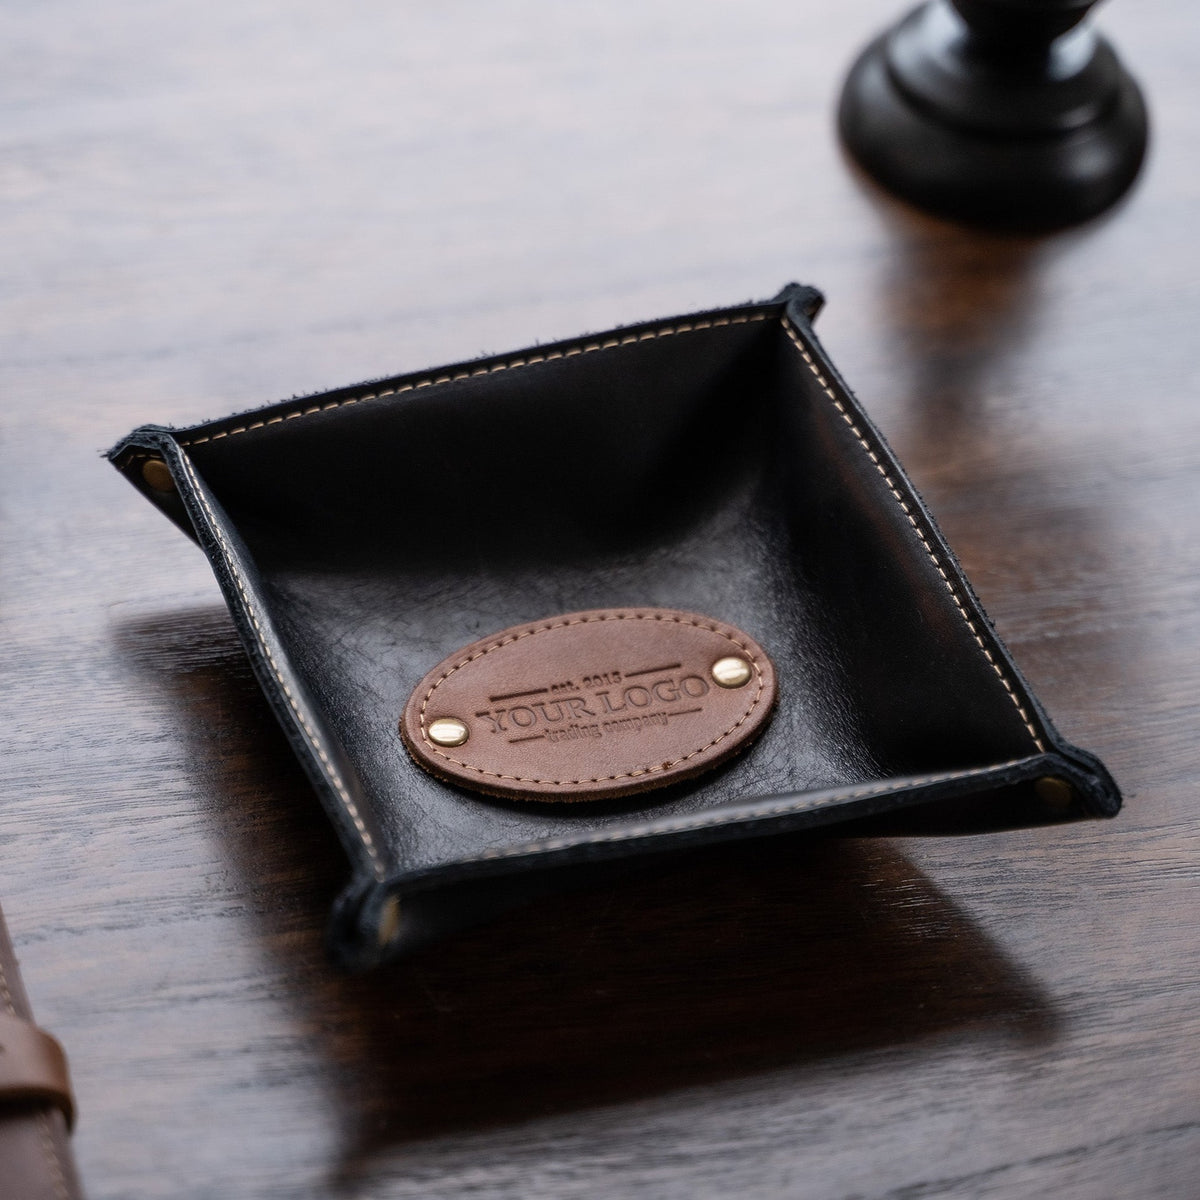 The Monticello Custom Logo Fine Leather Personalized Desk Valet Caddy Tray for Dresser or Office Gift Put Your Logo On It Corporate